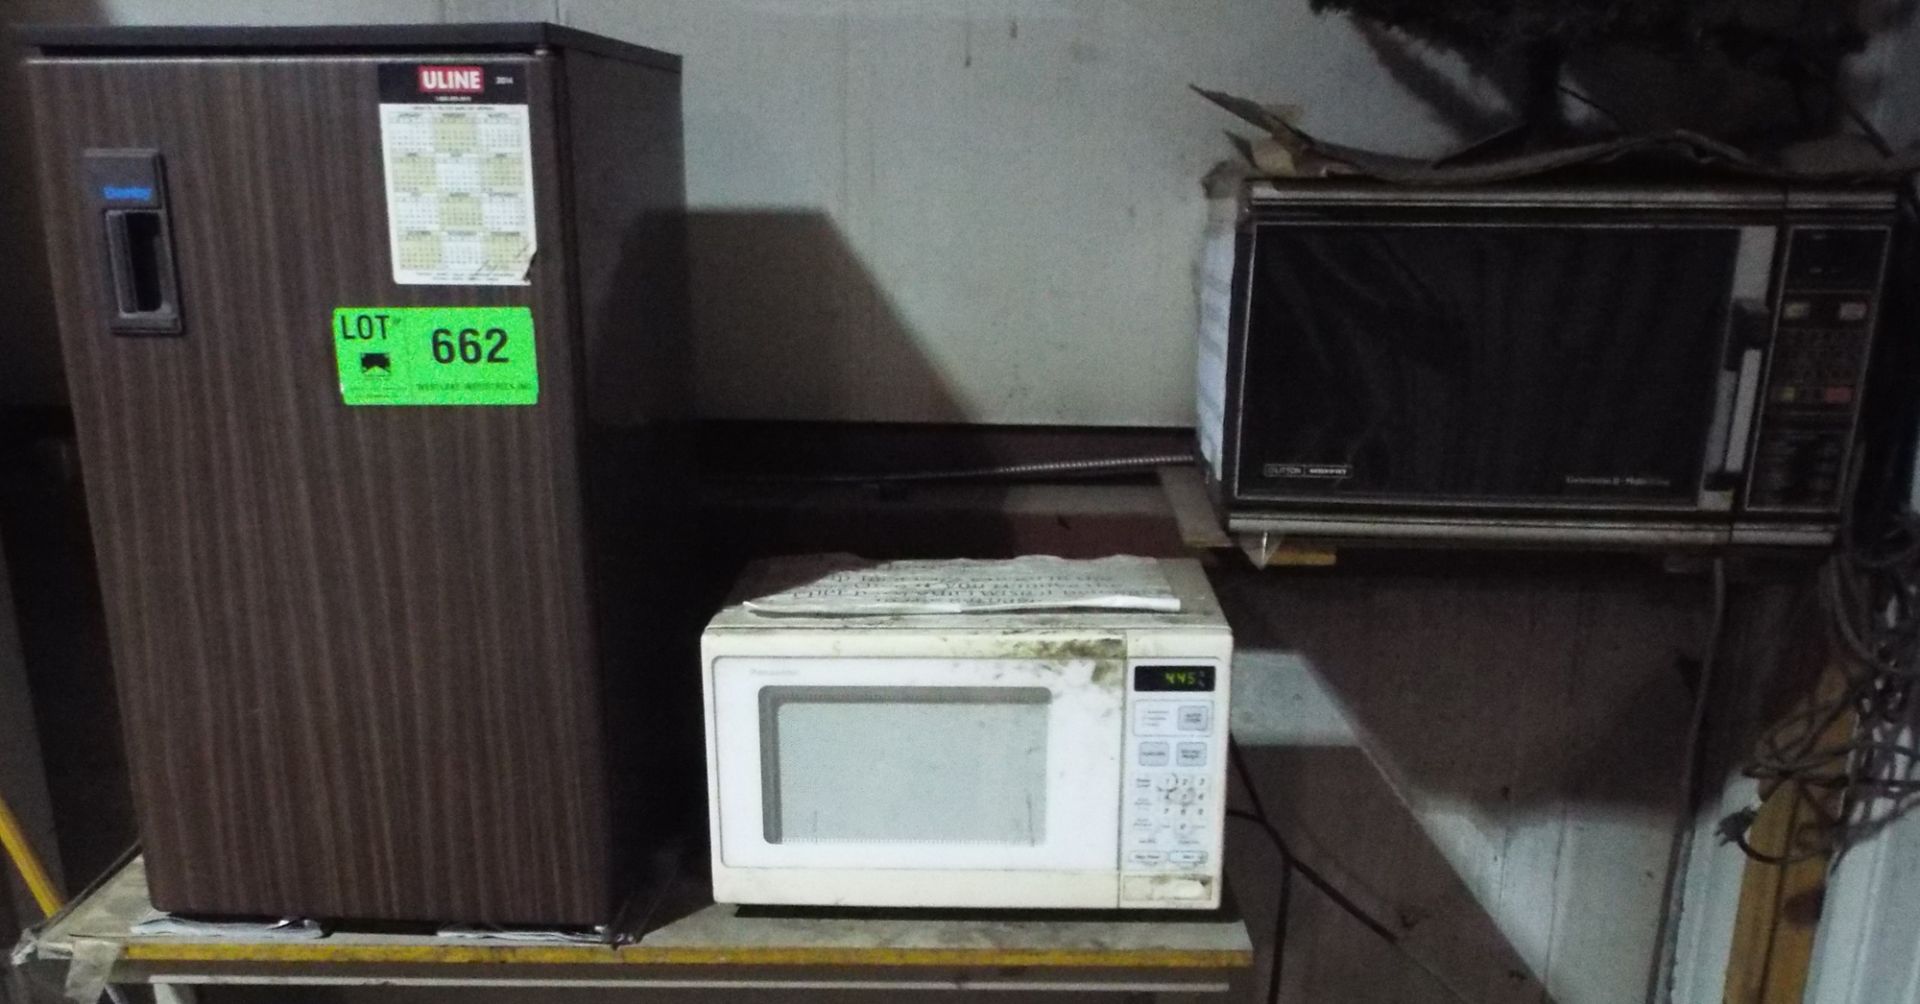 LOT/ BRAKE ROOM APPLIANCES AND FURNITURE - BAR FRIDGE, (2) MICROWAVES, (2) FOLDING TABLES & CHAIRS